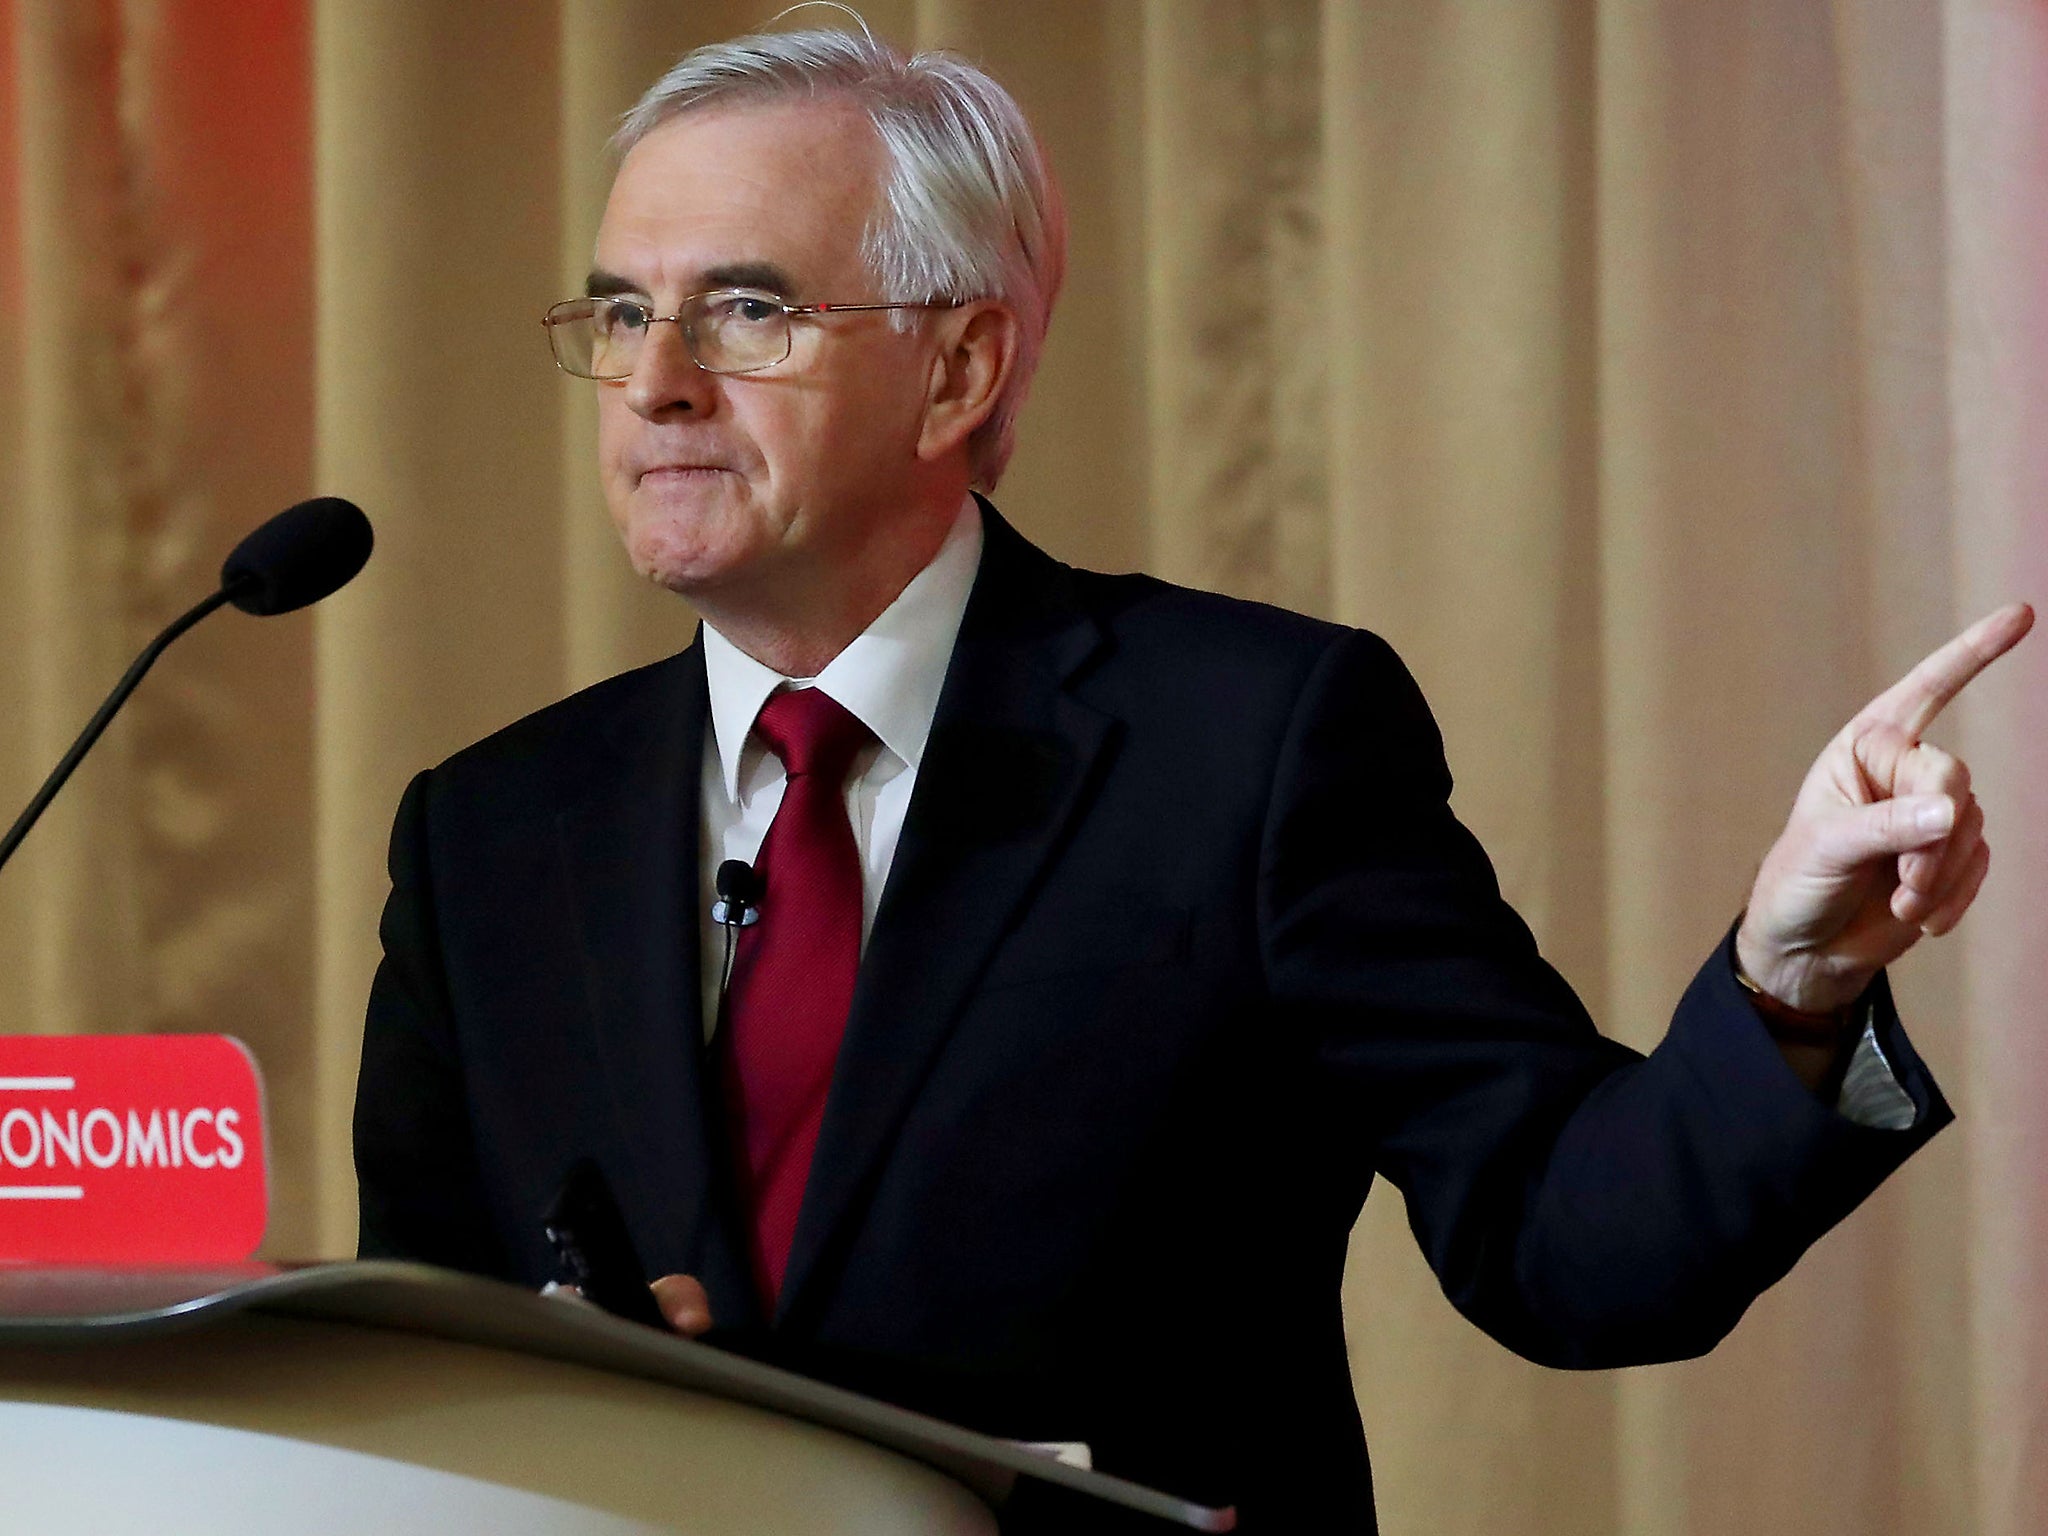 &#13;
Shadow Chancellor John McDonnell supports greater economic intervention&#13;